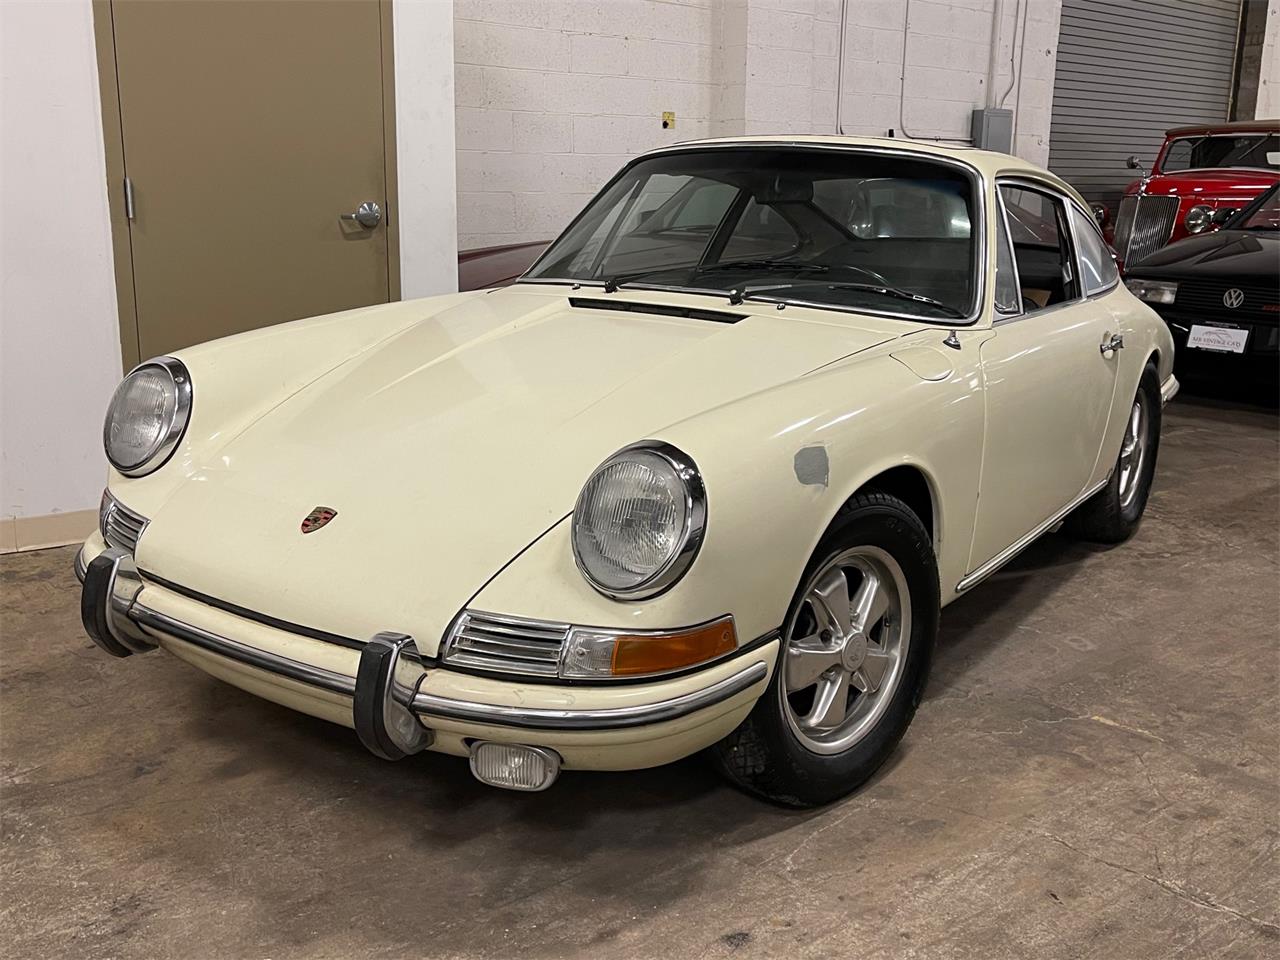 1968 Porsche 912 for sale in Cleveland, OH – photo 70